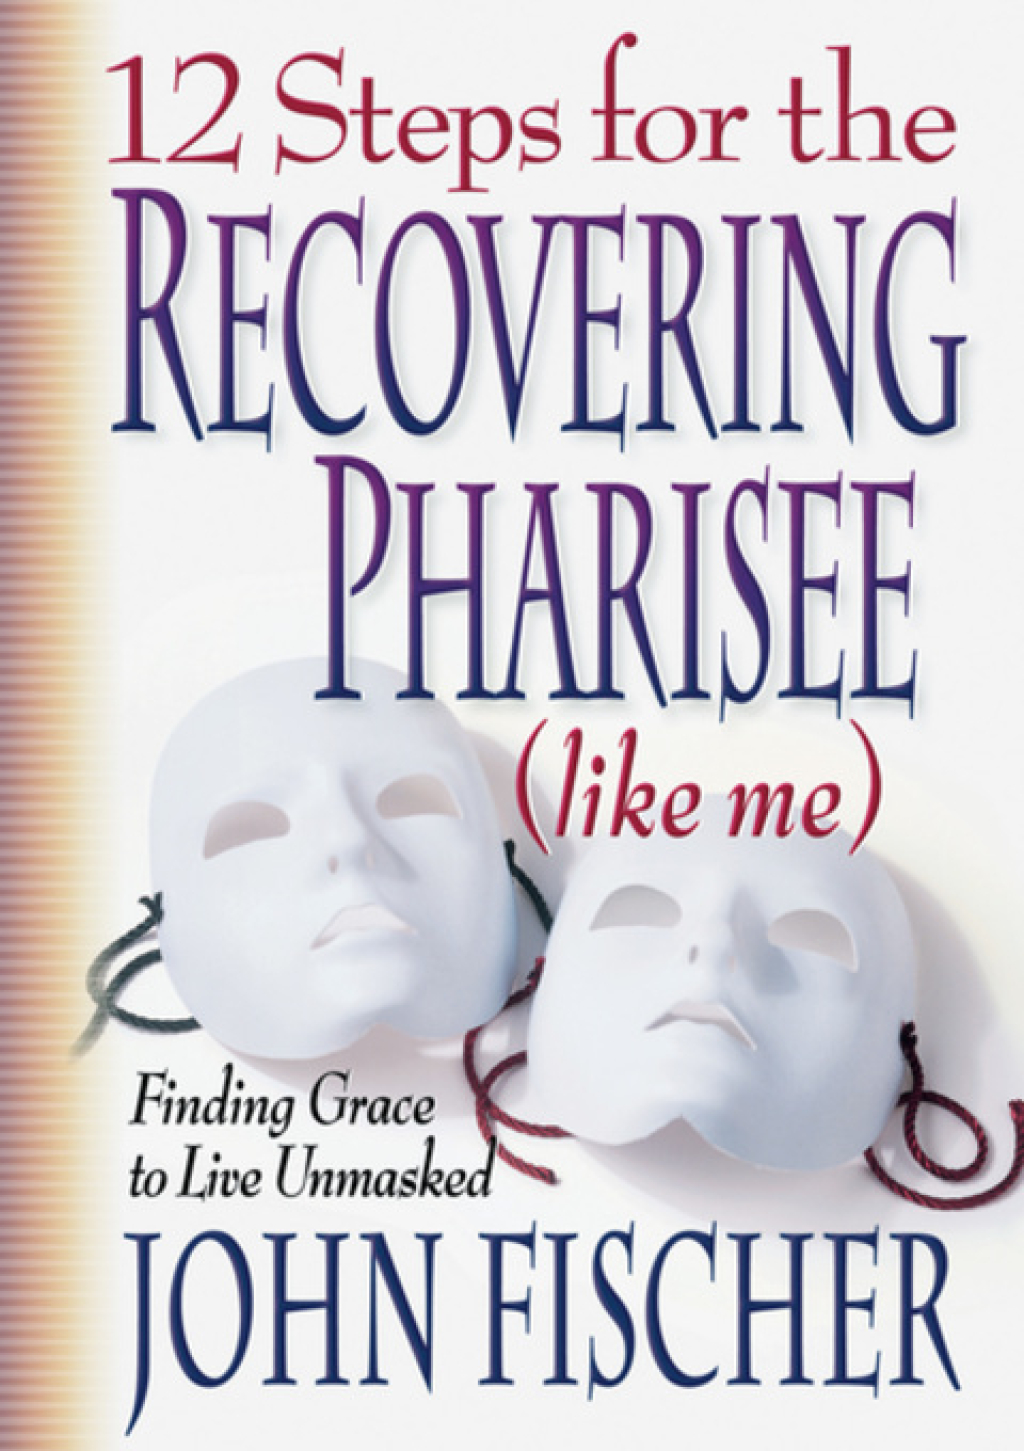 12 Steps for the Recovering Pharisee (like me) (eBook) - John Fischer,